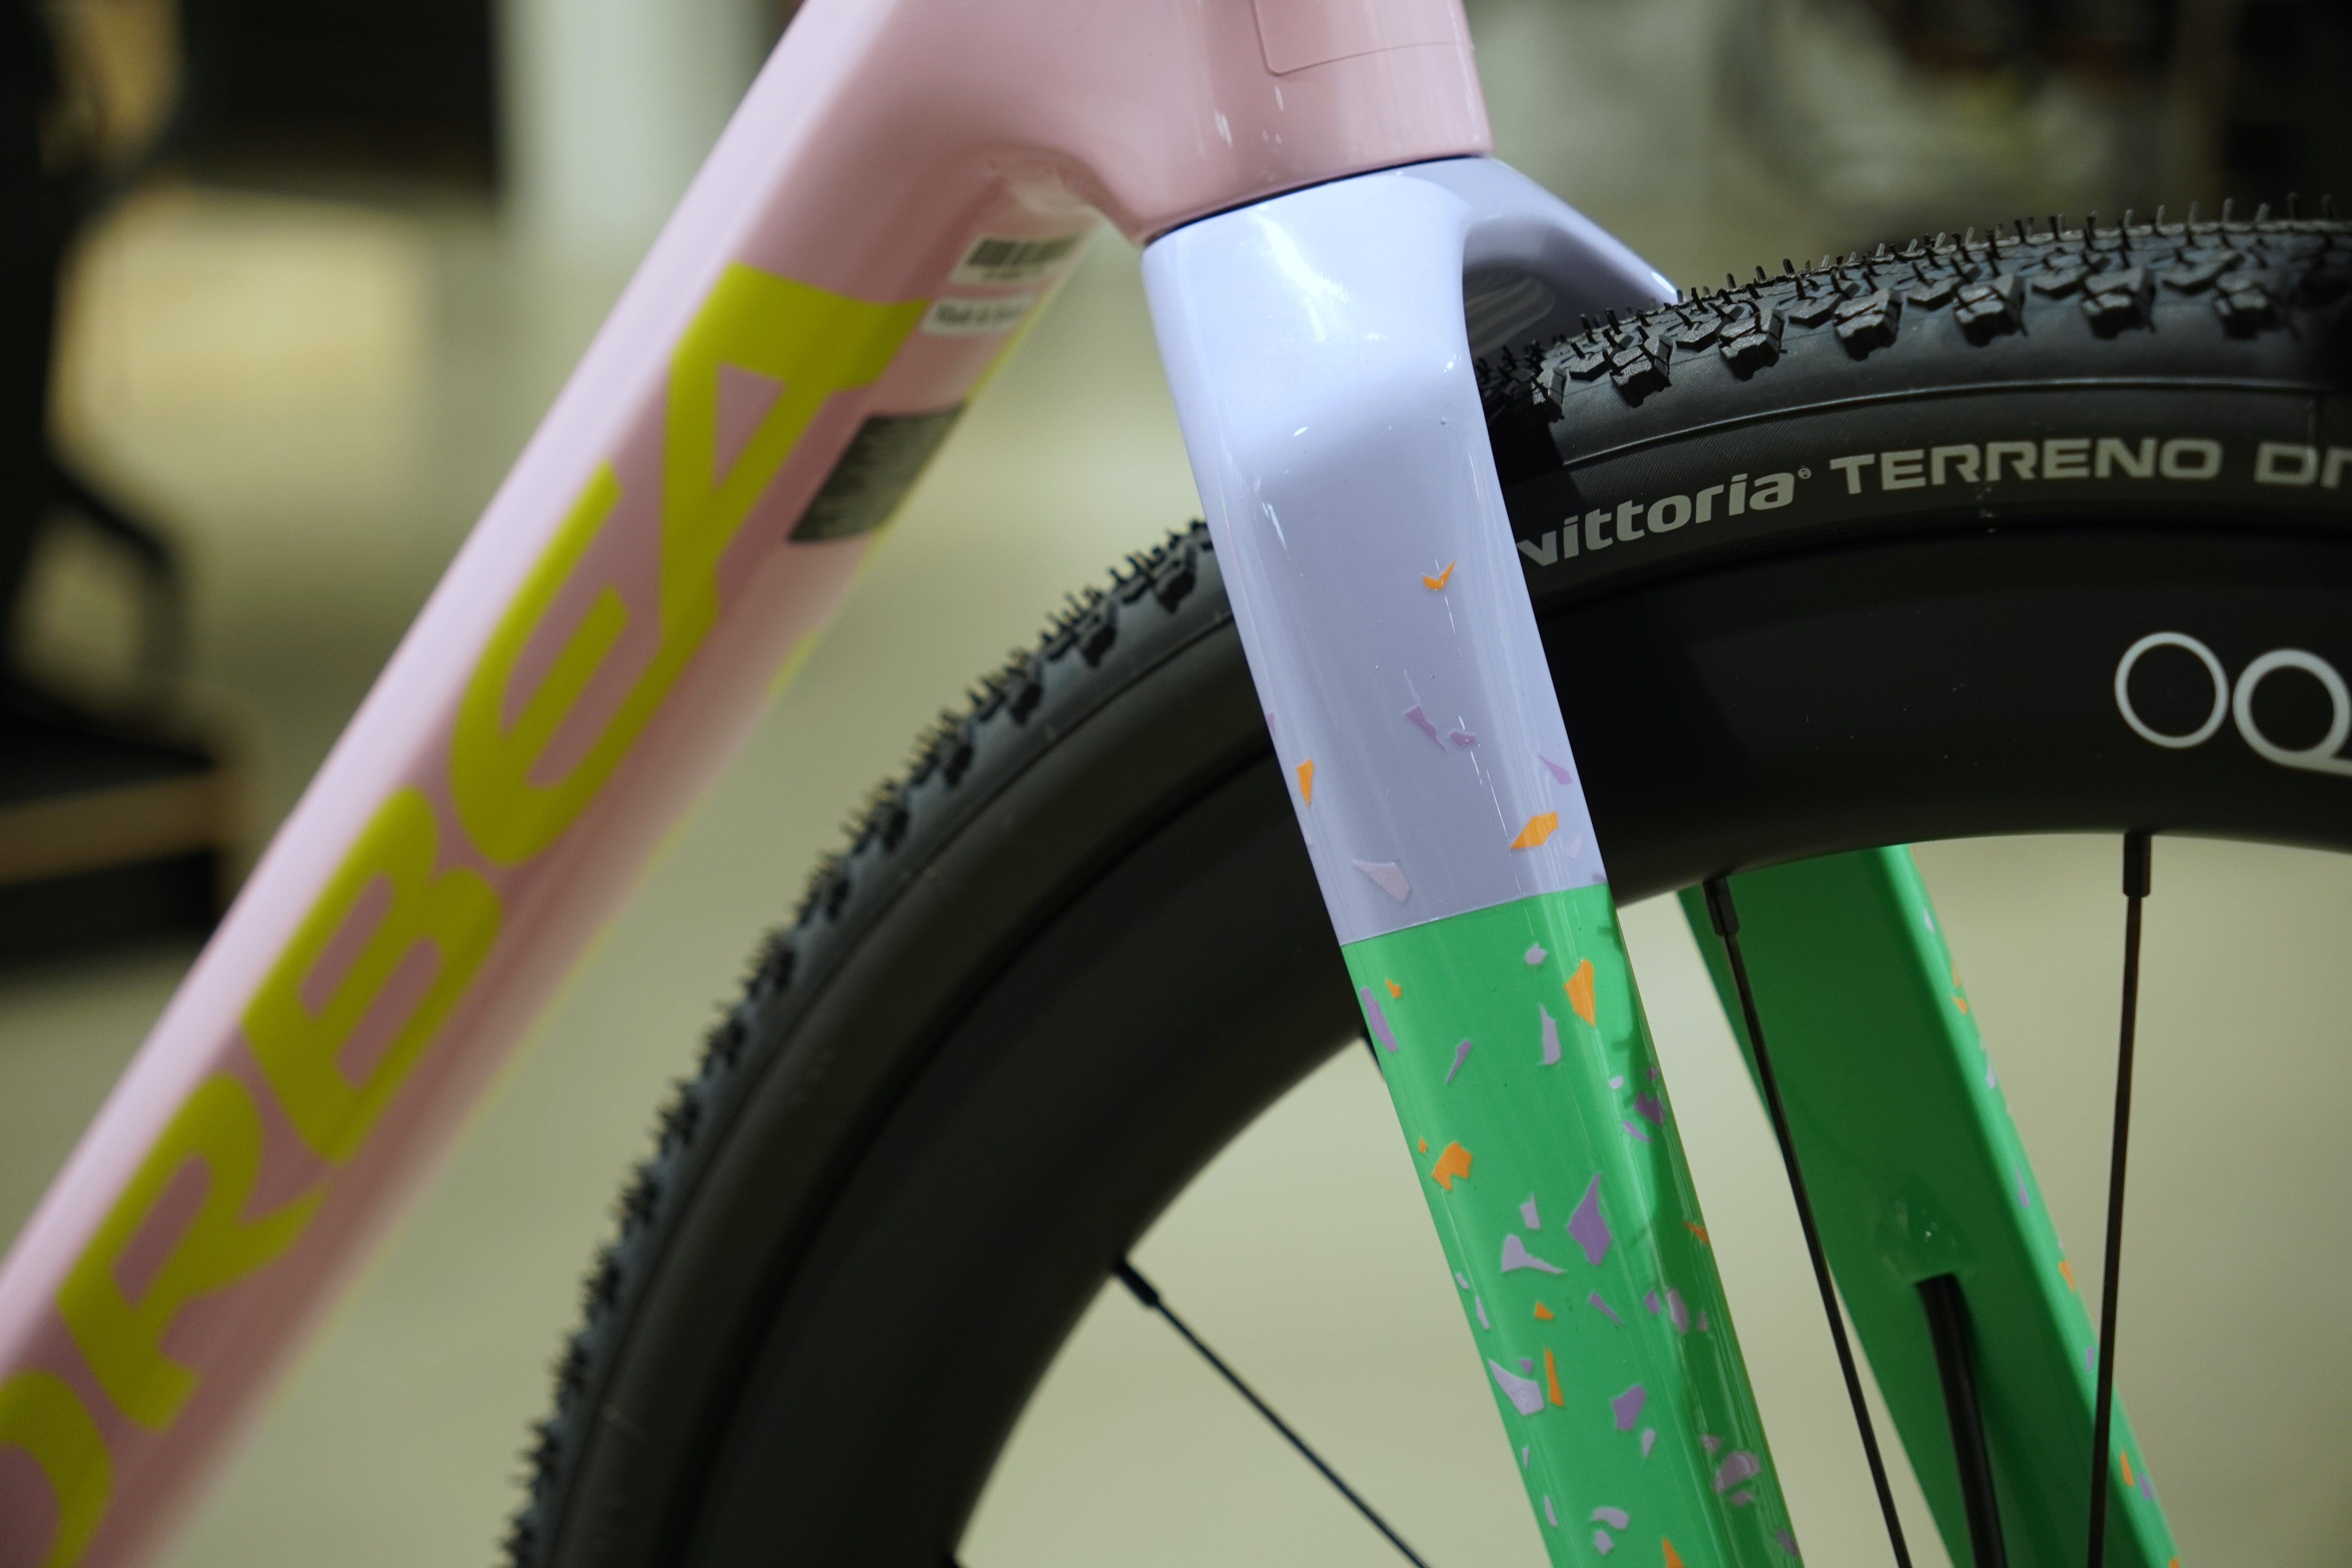 Orbea TERRA M31eTEAM 1x Carbon, My-O Pink/Lavender/Mint - Small